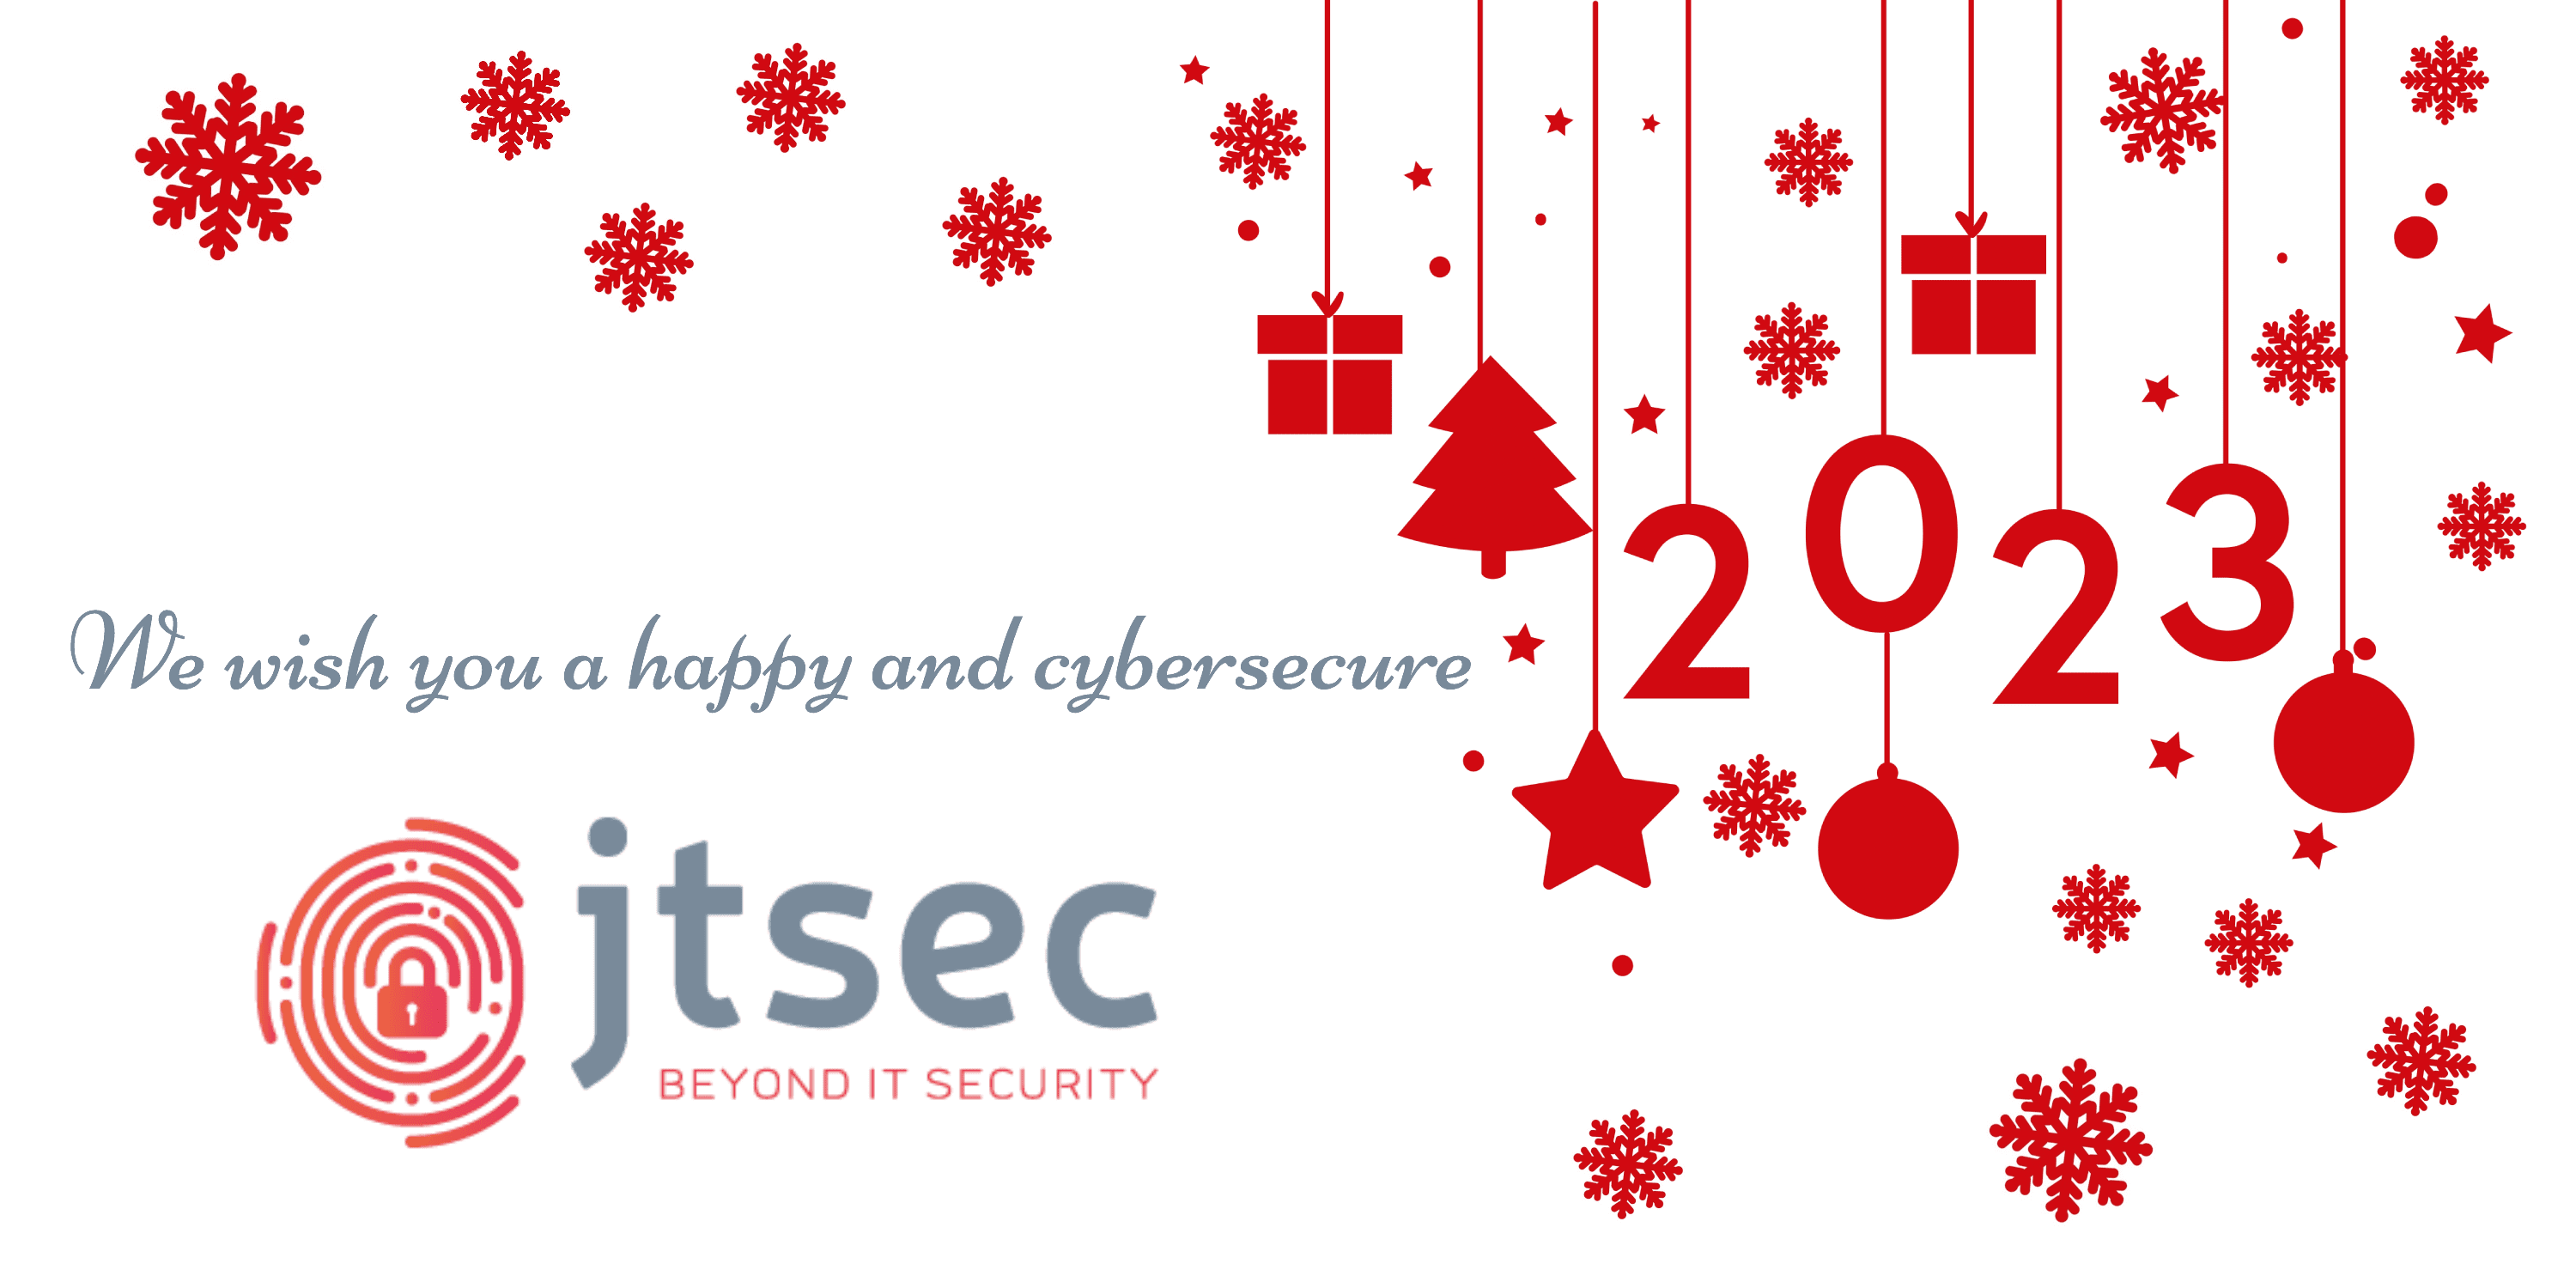 We wish you a happy and cybersecure 2023.